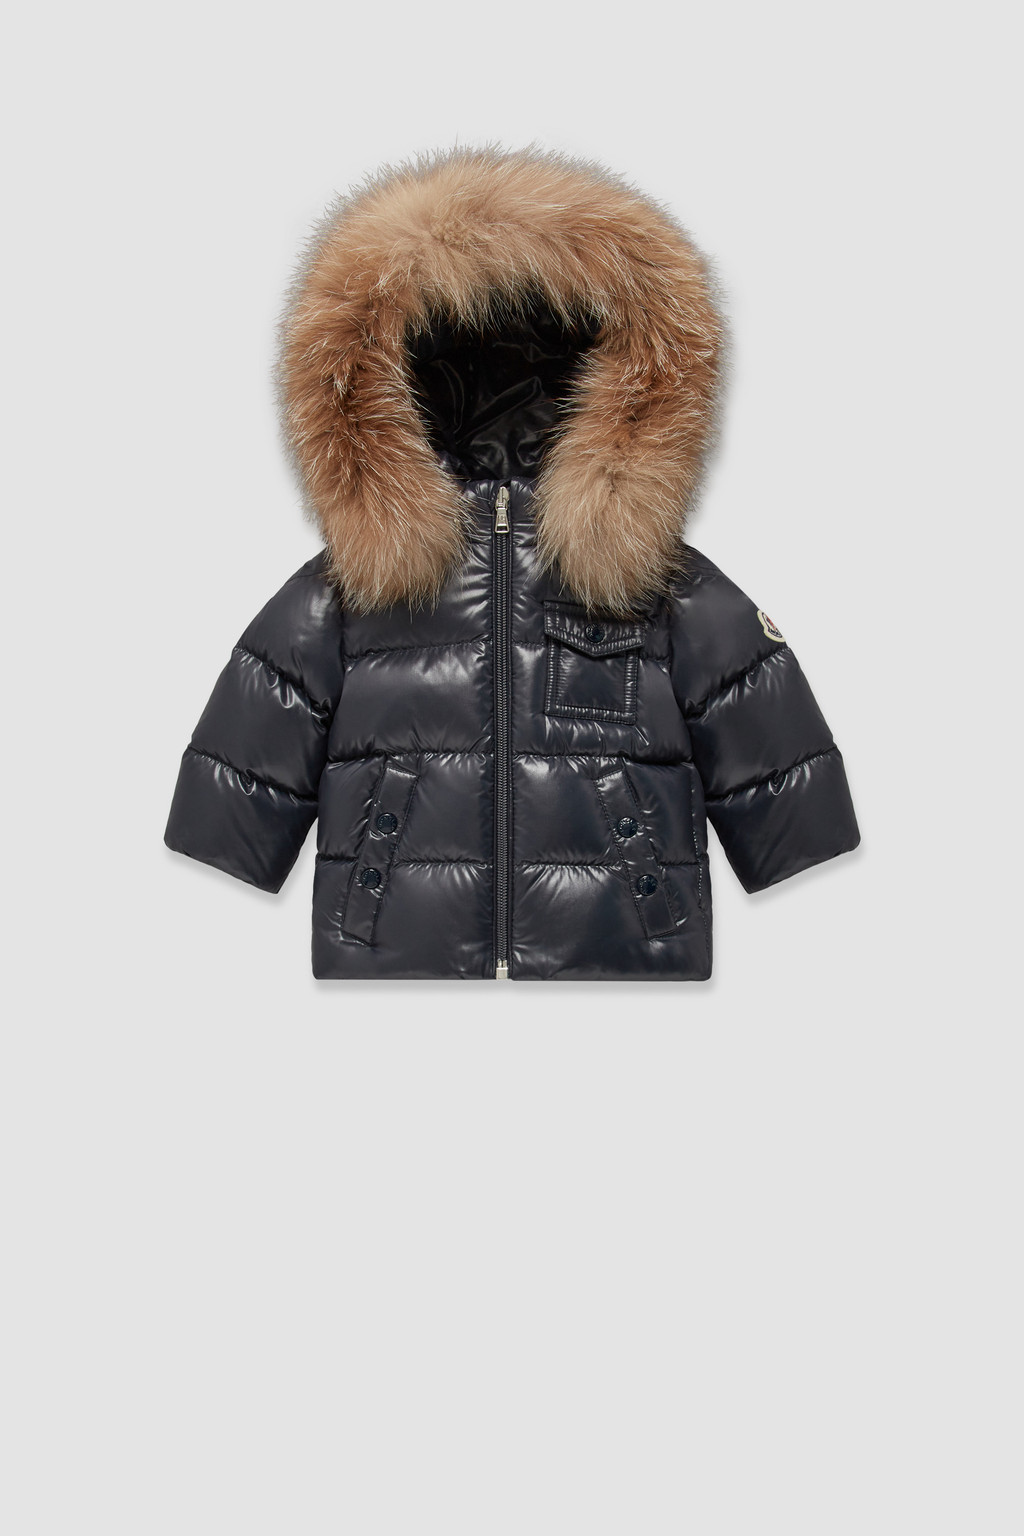 Baby Boy Winter Coats and Jackets to Dress Stylishly for Winters